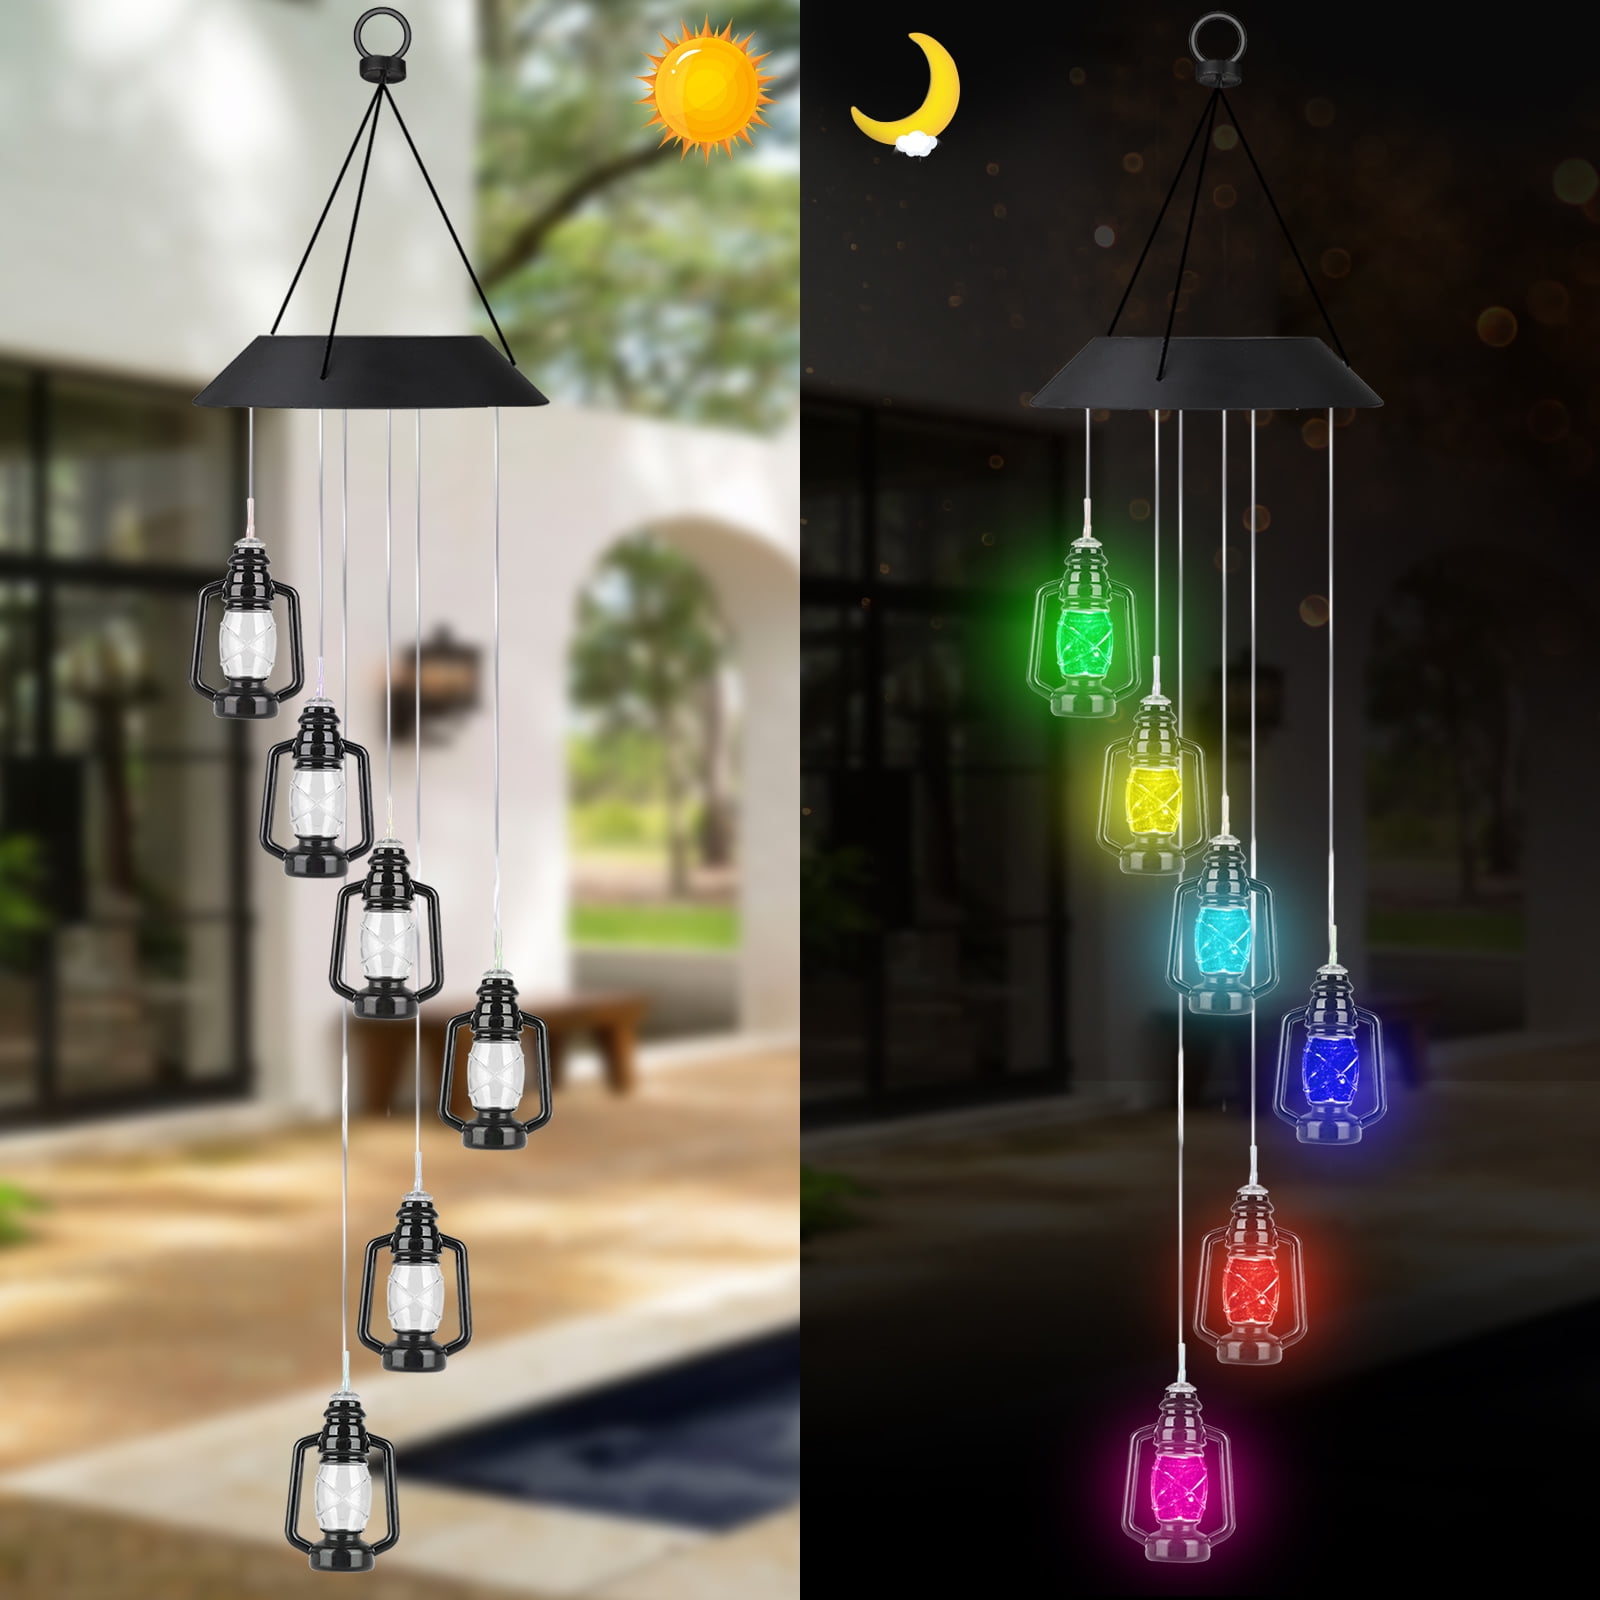 Solar Powered Wind Chime Colour Changing LED Light Hanging Garden Yard Ornament 